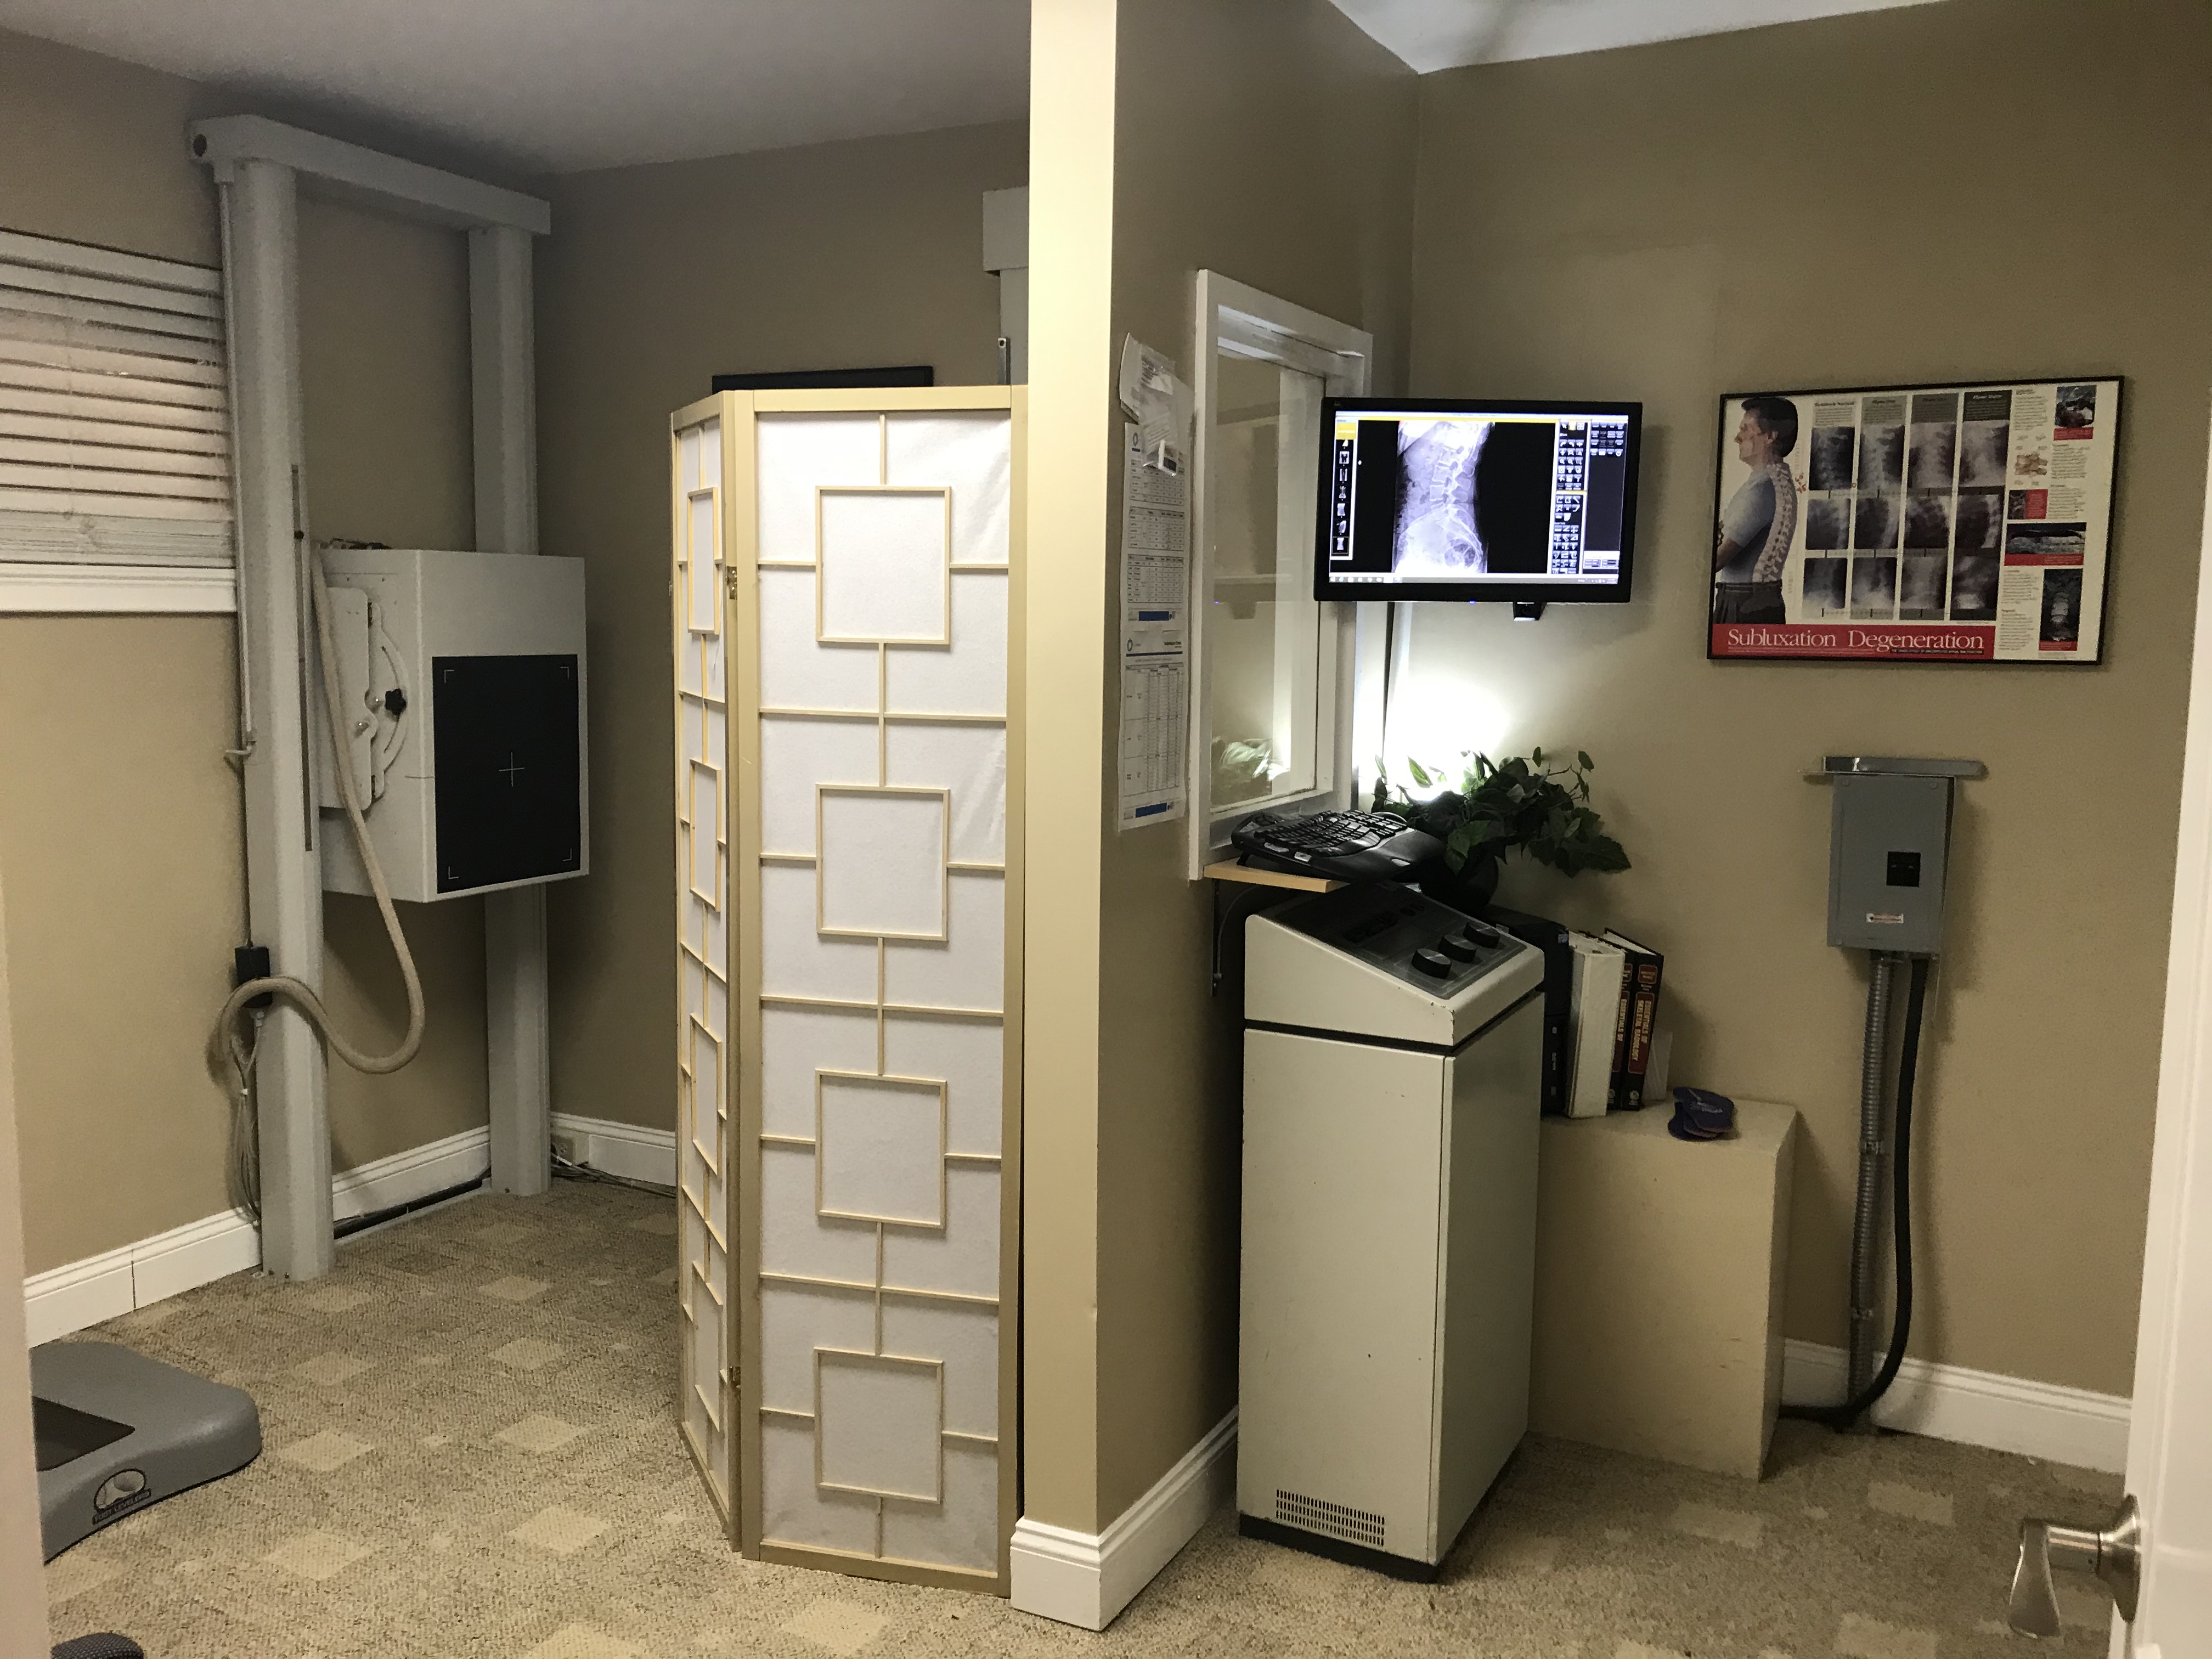 The Doctors Wellness Group Digit Xray and Exam Room